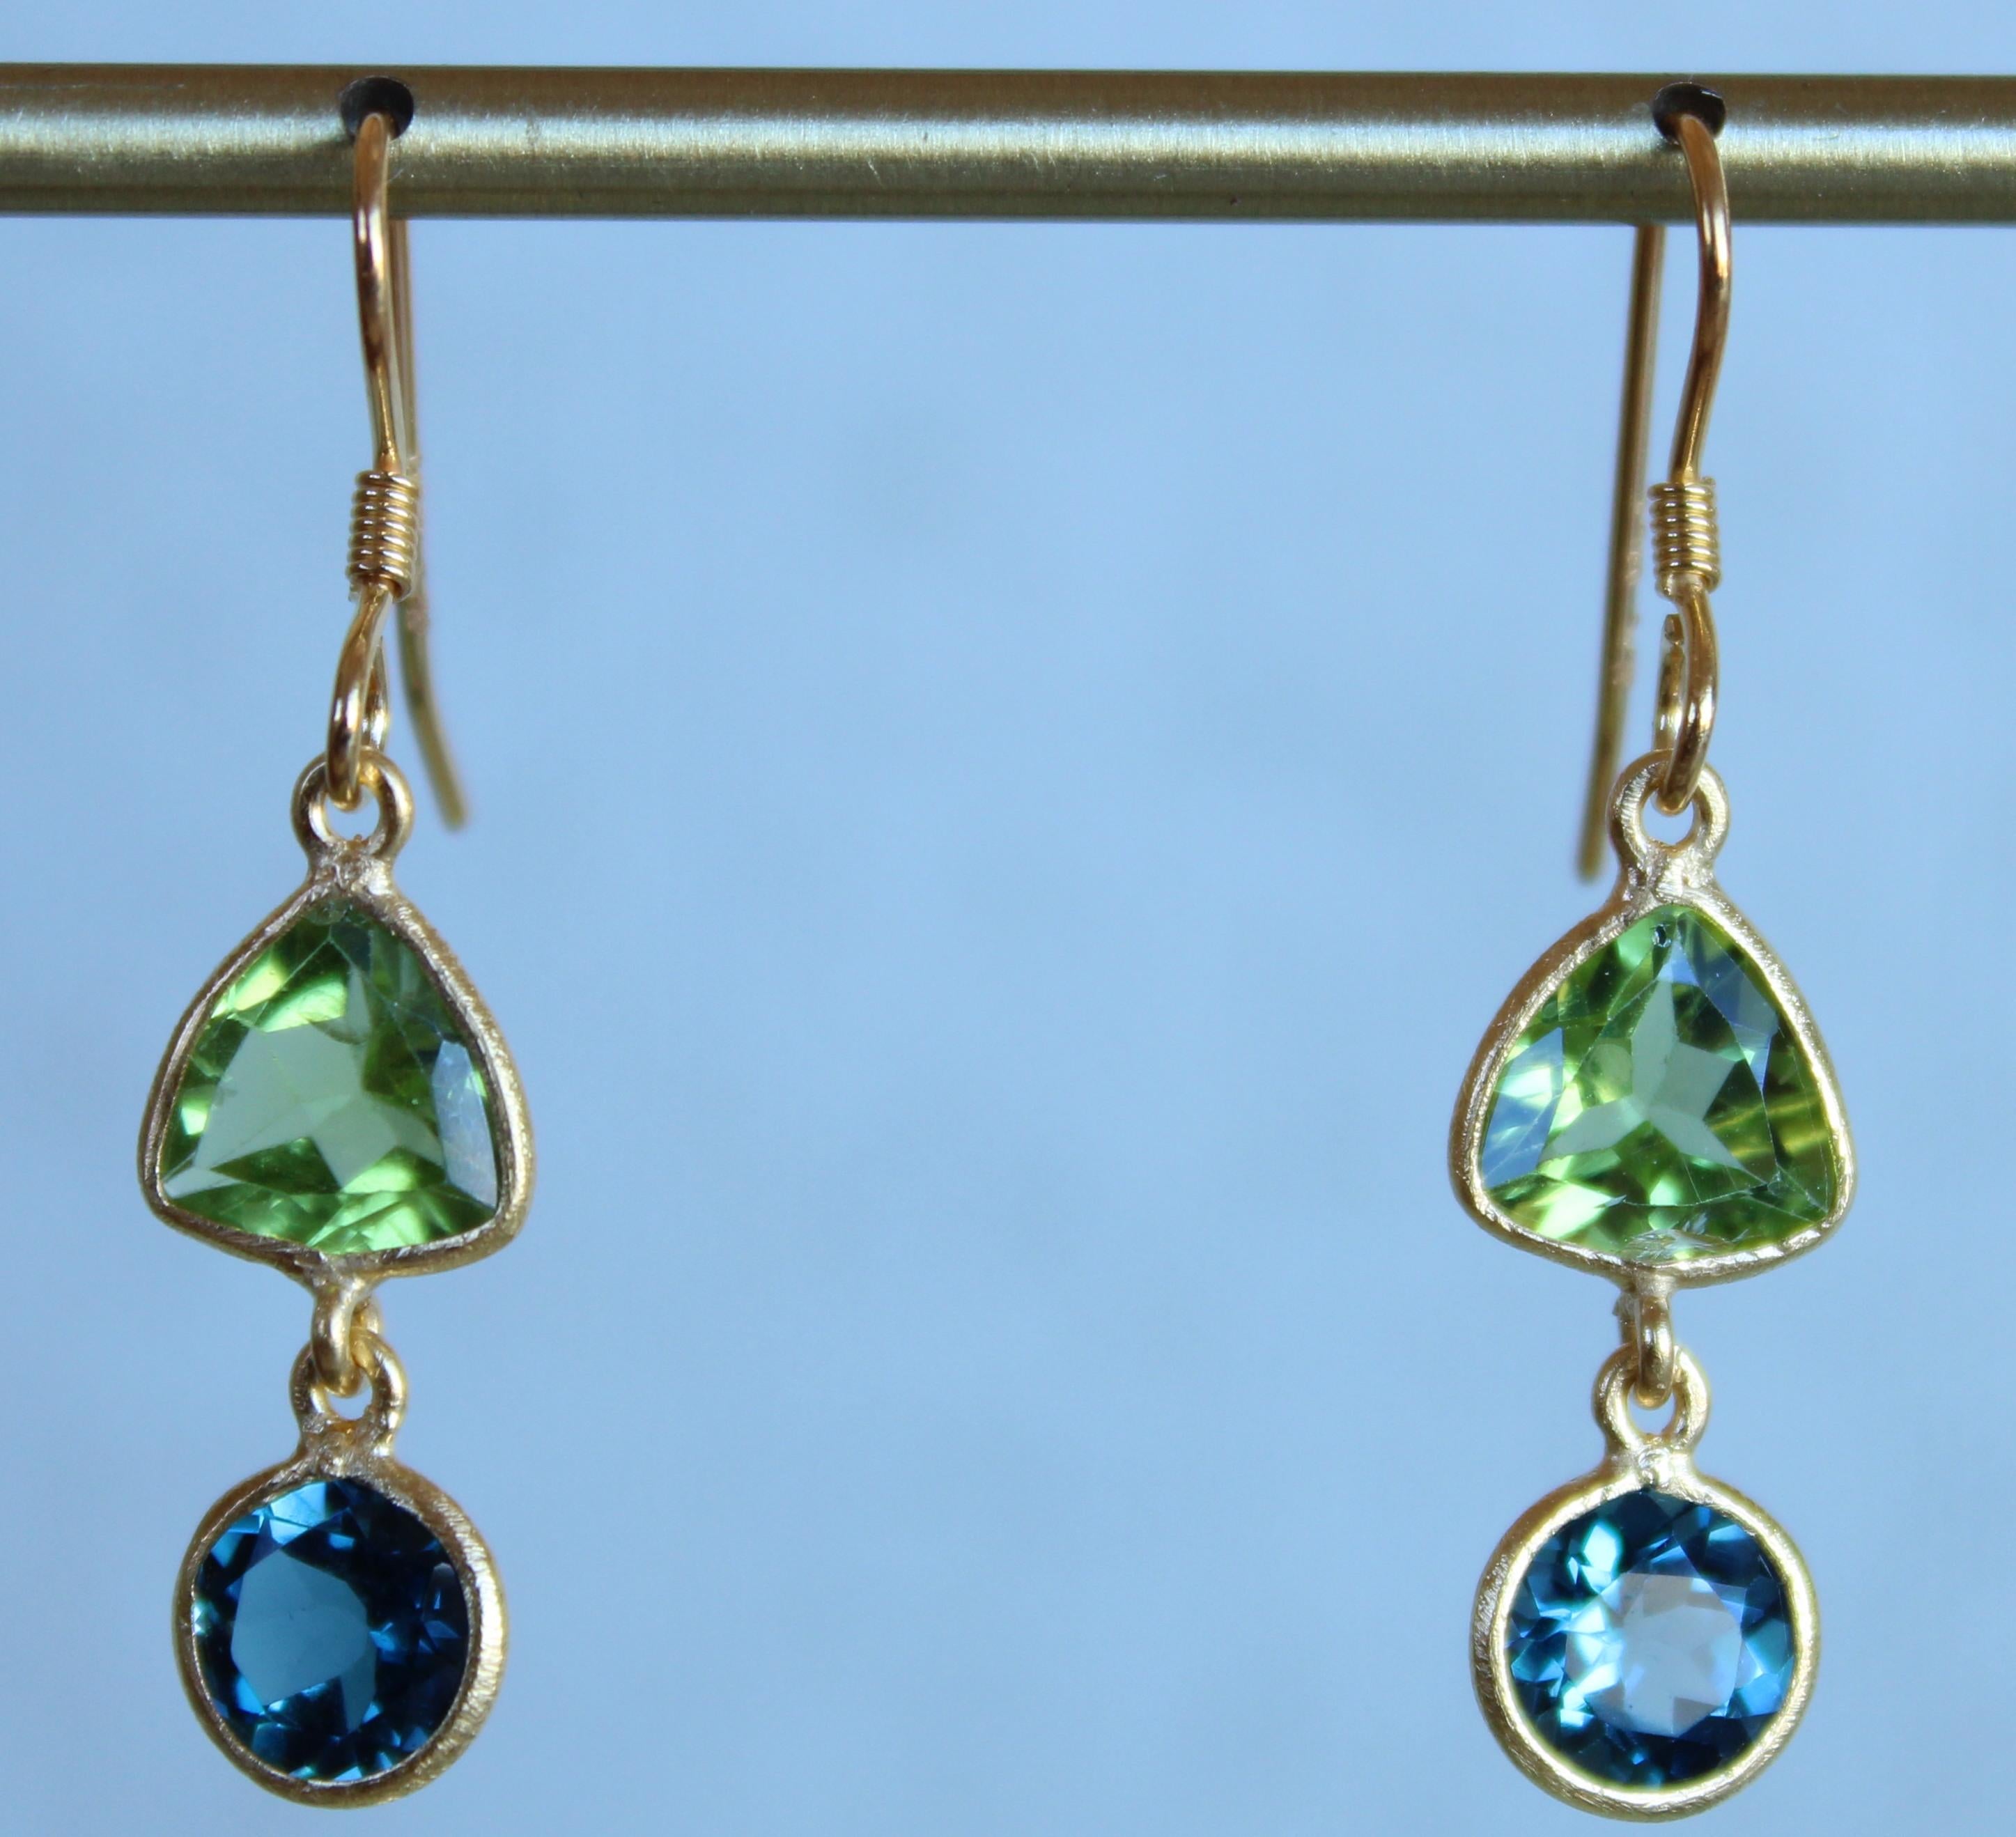 Bursting with sparkle and colour, these new Oiseau Bleu dangle earrings are comprised of nearly 2 carats of green trillion Peridot set above two round London Blue Topaz stones. These earrings are designed to be worn either as a pair or as a single